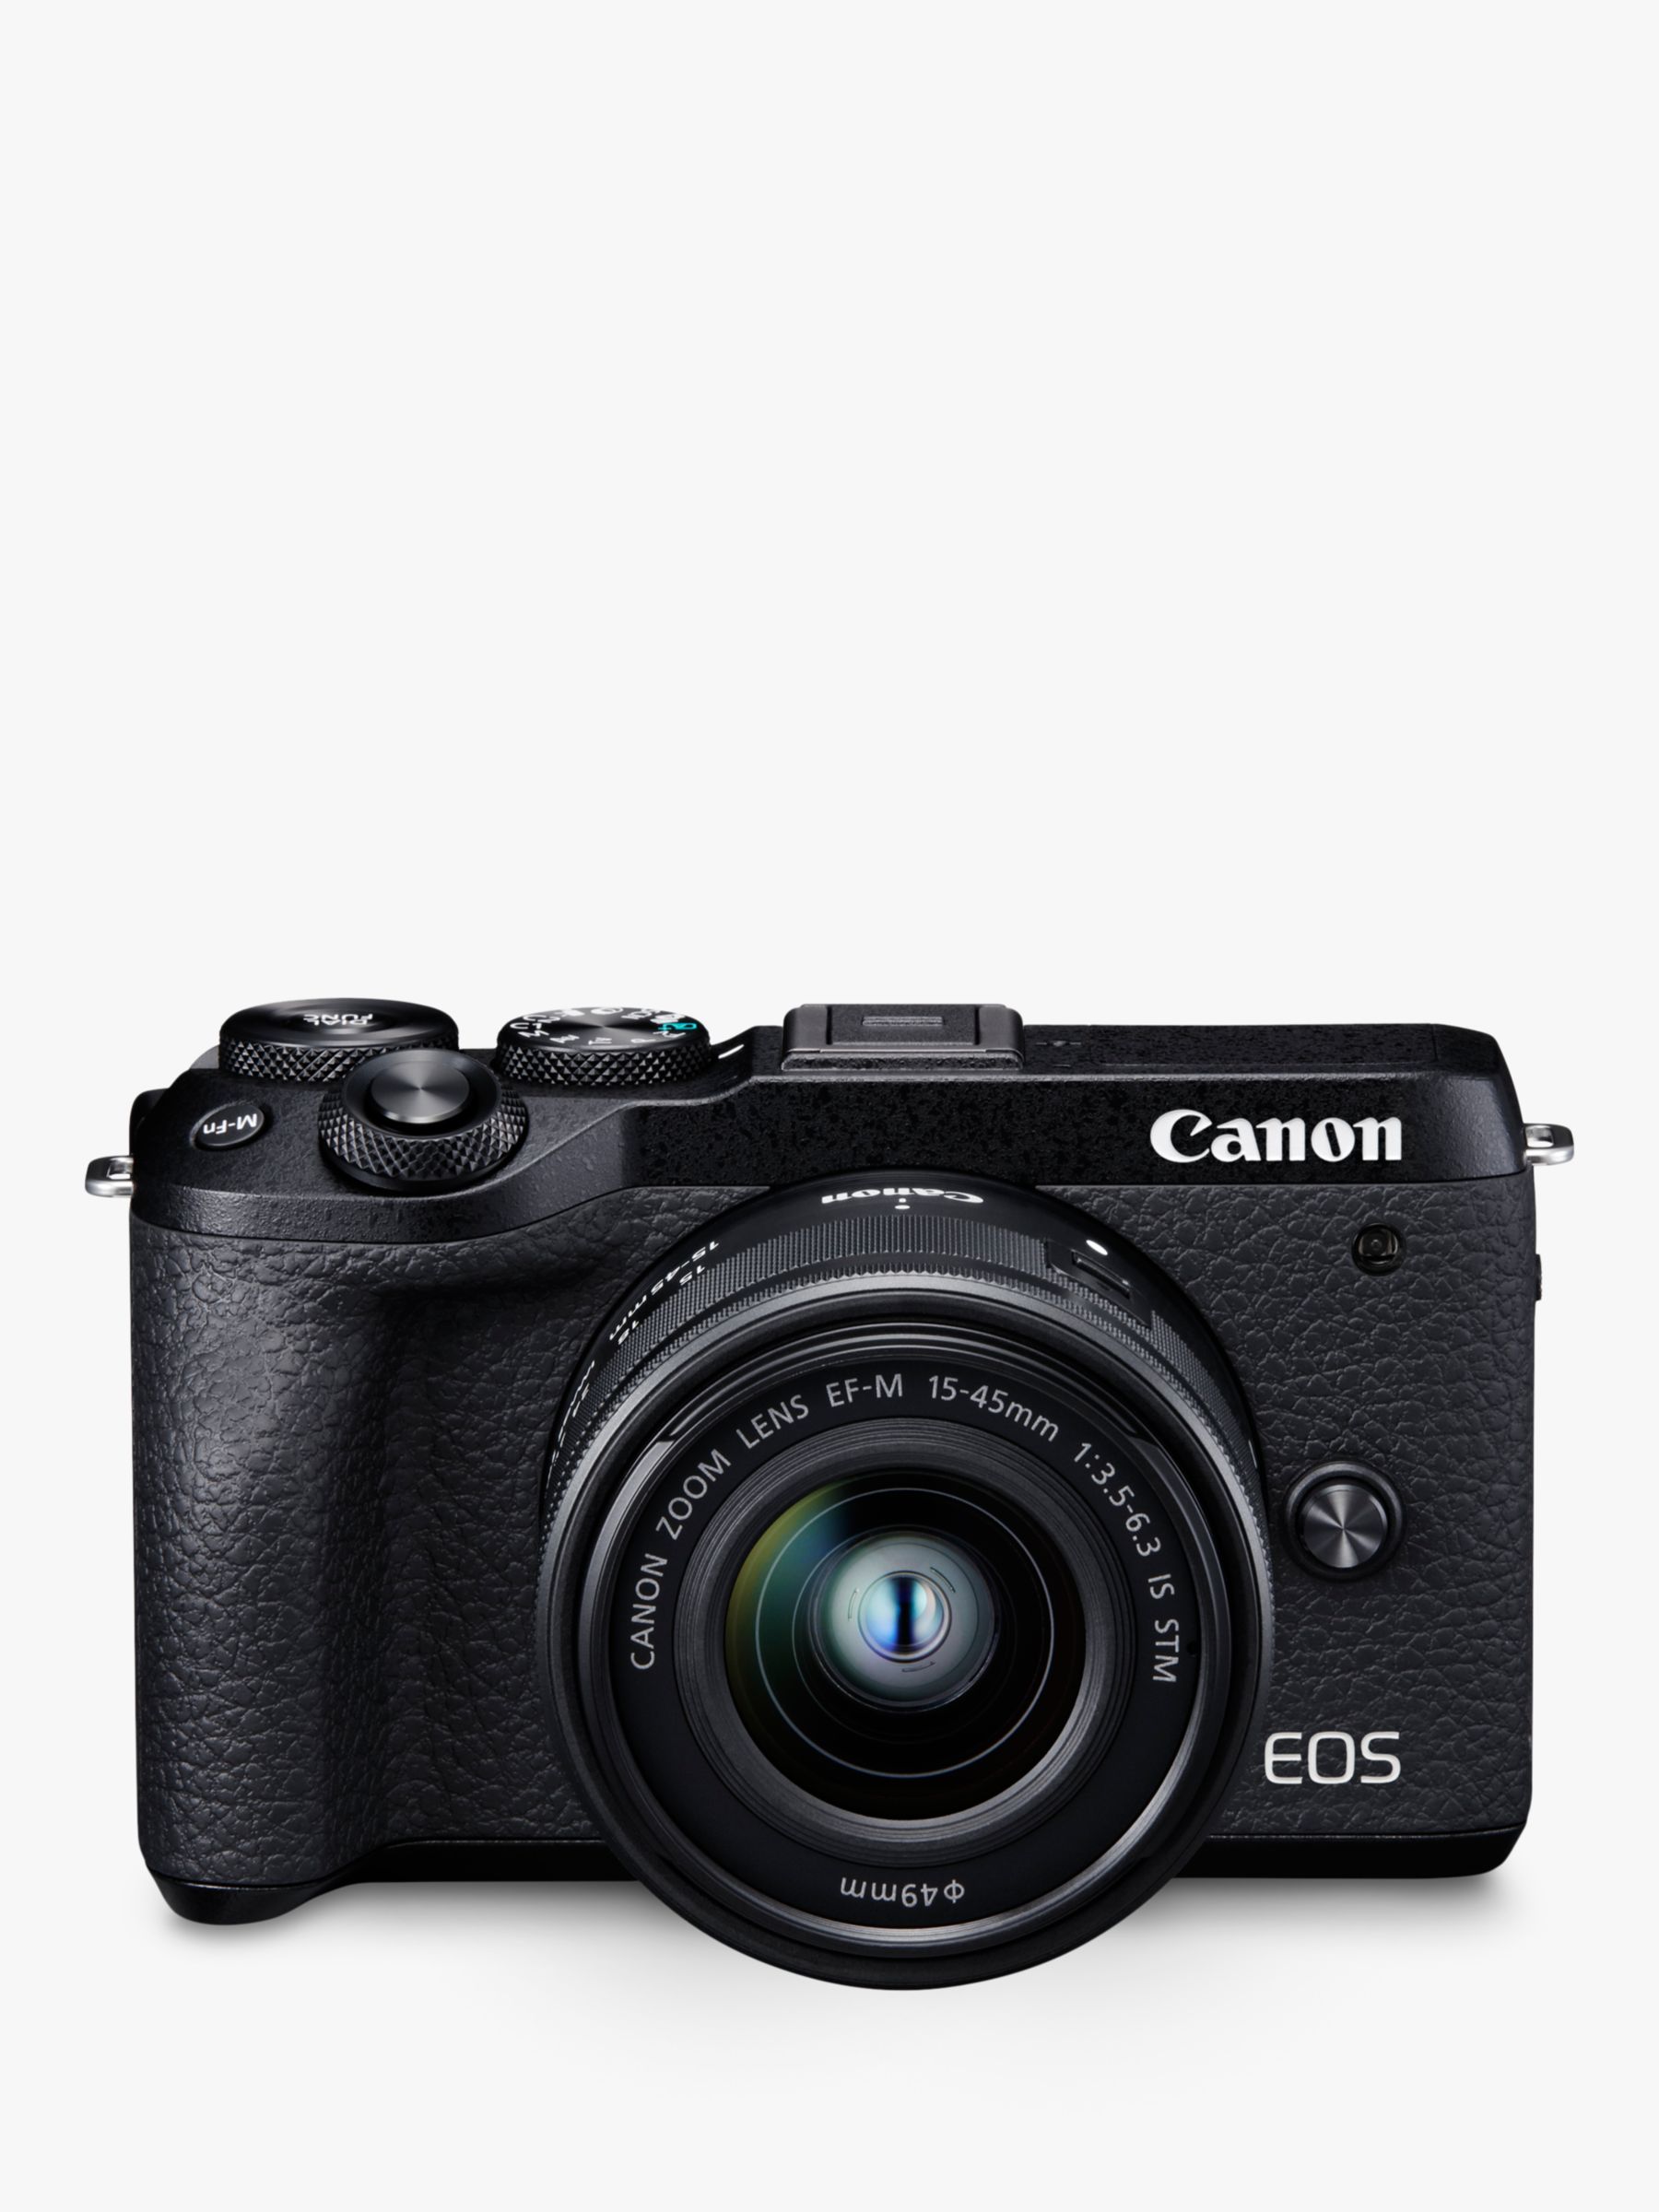 Image of Canon EOS M6 Mark II Compact System Camera with EFM 1545mm IS STM Lens 4K Ultra HD 325MP WiFi Bluetooth 3 LCD Tiltable Touch Screen Black